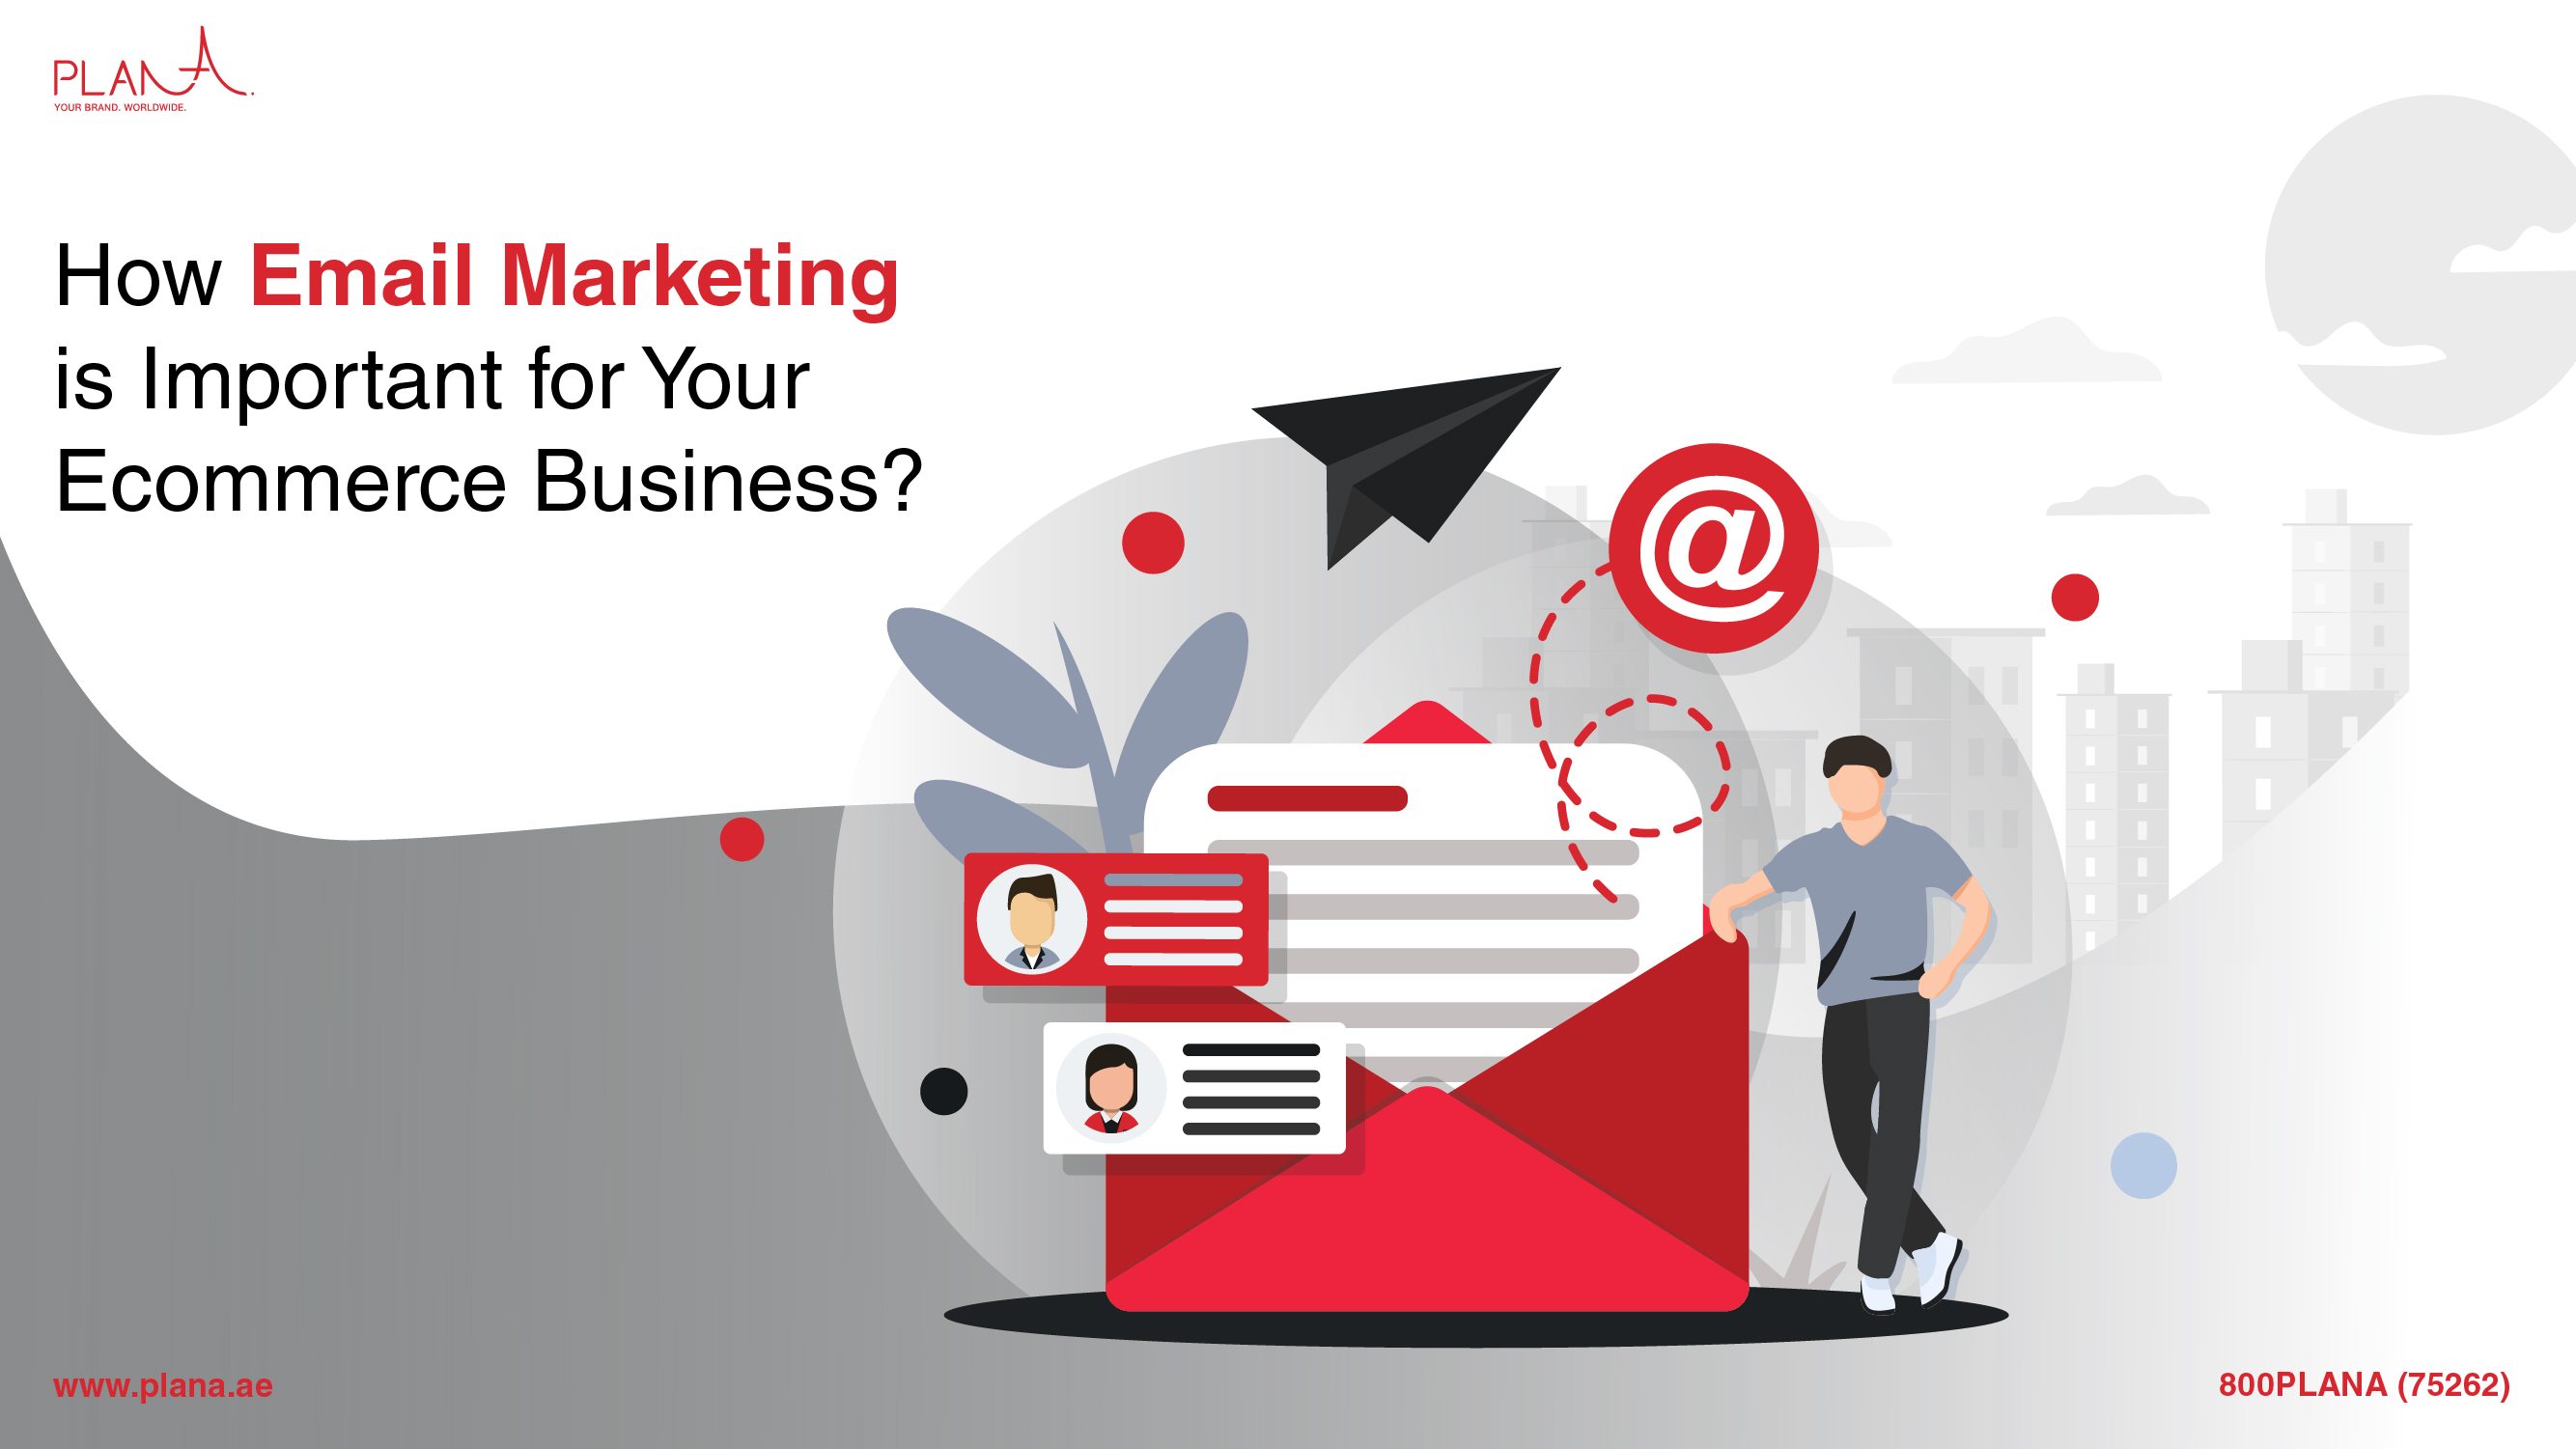 How Email Marketing is Important for Your Ecommerce Business?